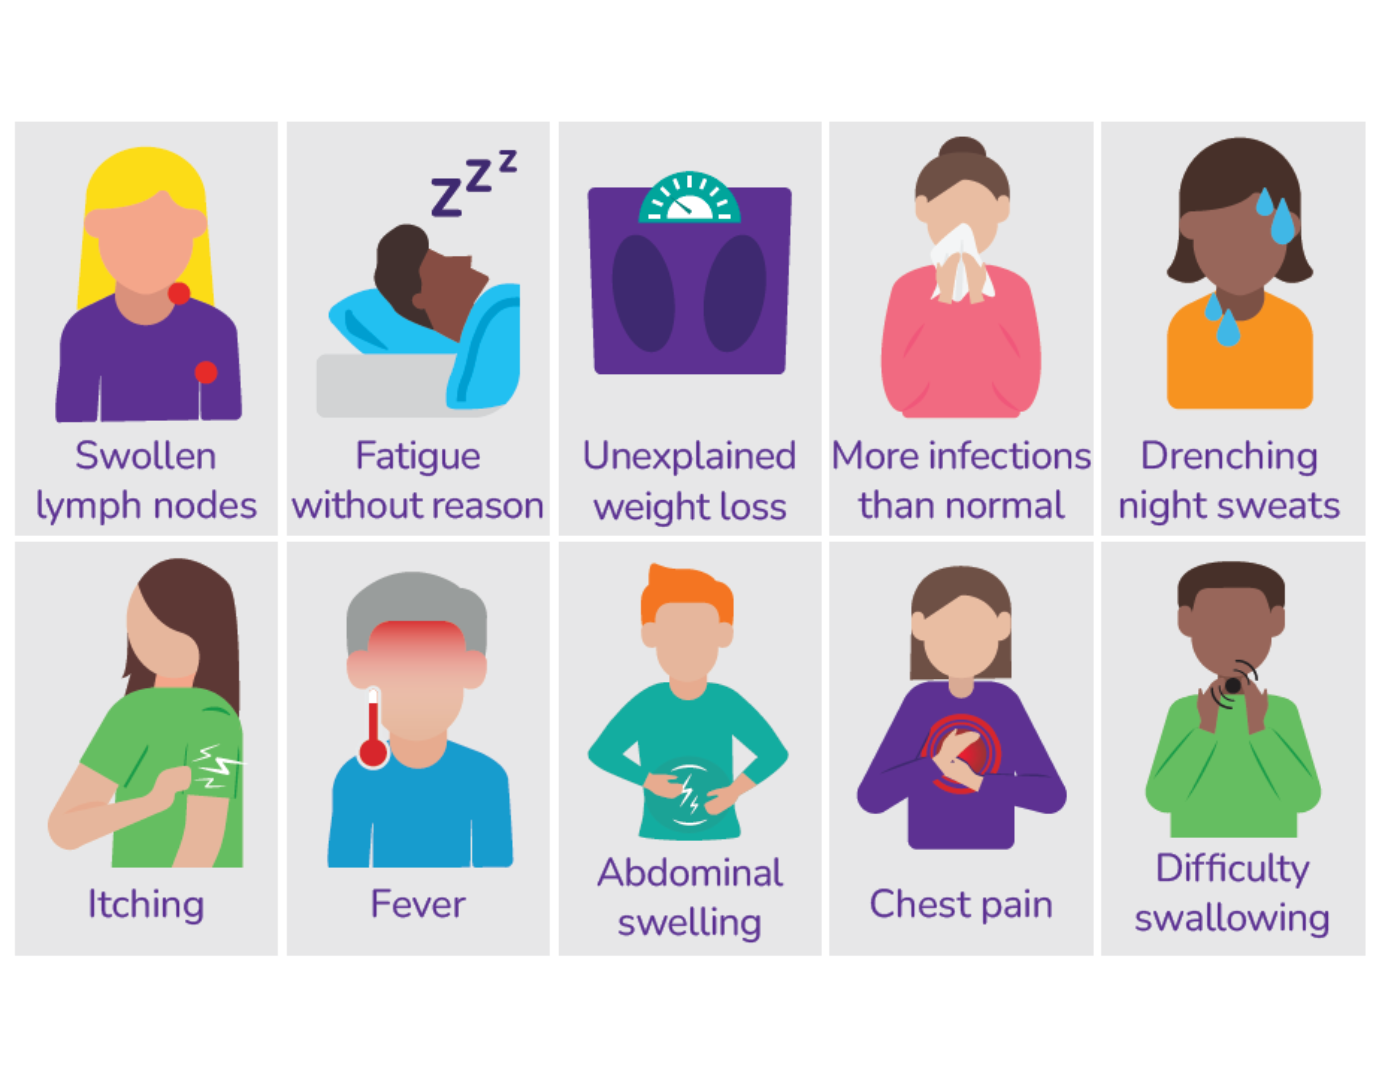 10 symptoms of lymphoma depicted as cartoon-style images. Swollen lymph glands, fatigue without reason, unexplained weight loss, more infections than normal, drenching night sweats, itching, fever, abdominal swelling, chest pain, difficult swallowing.